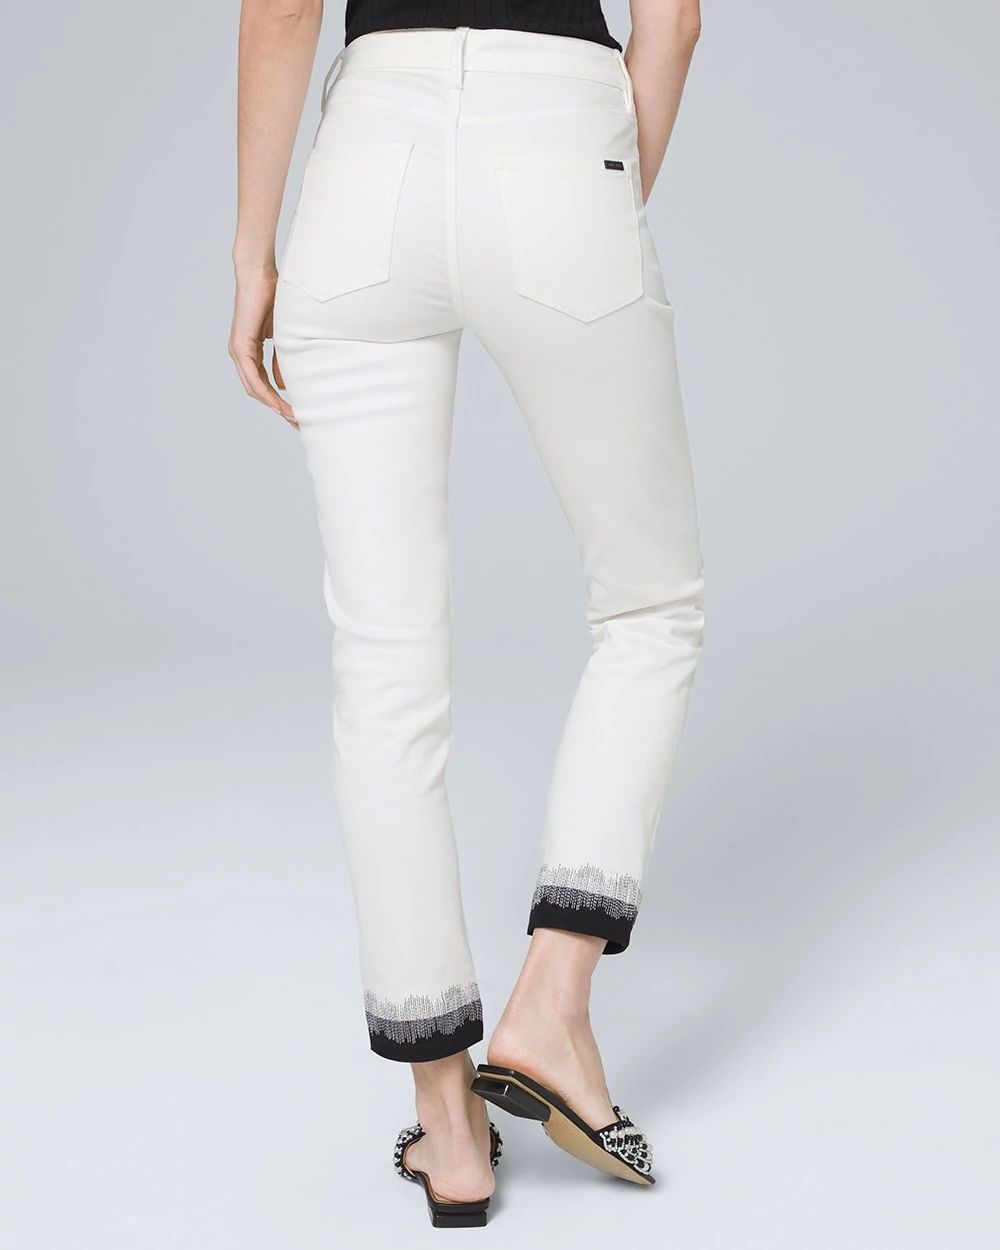 High-Rise Stitch Cuff Slim Crop Jeans click to view larger image.